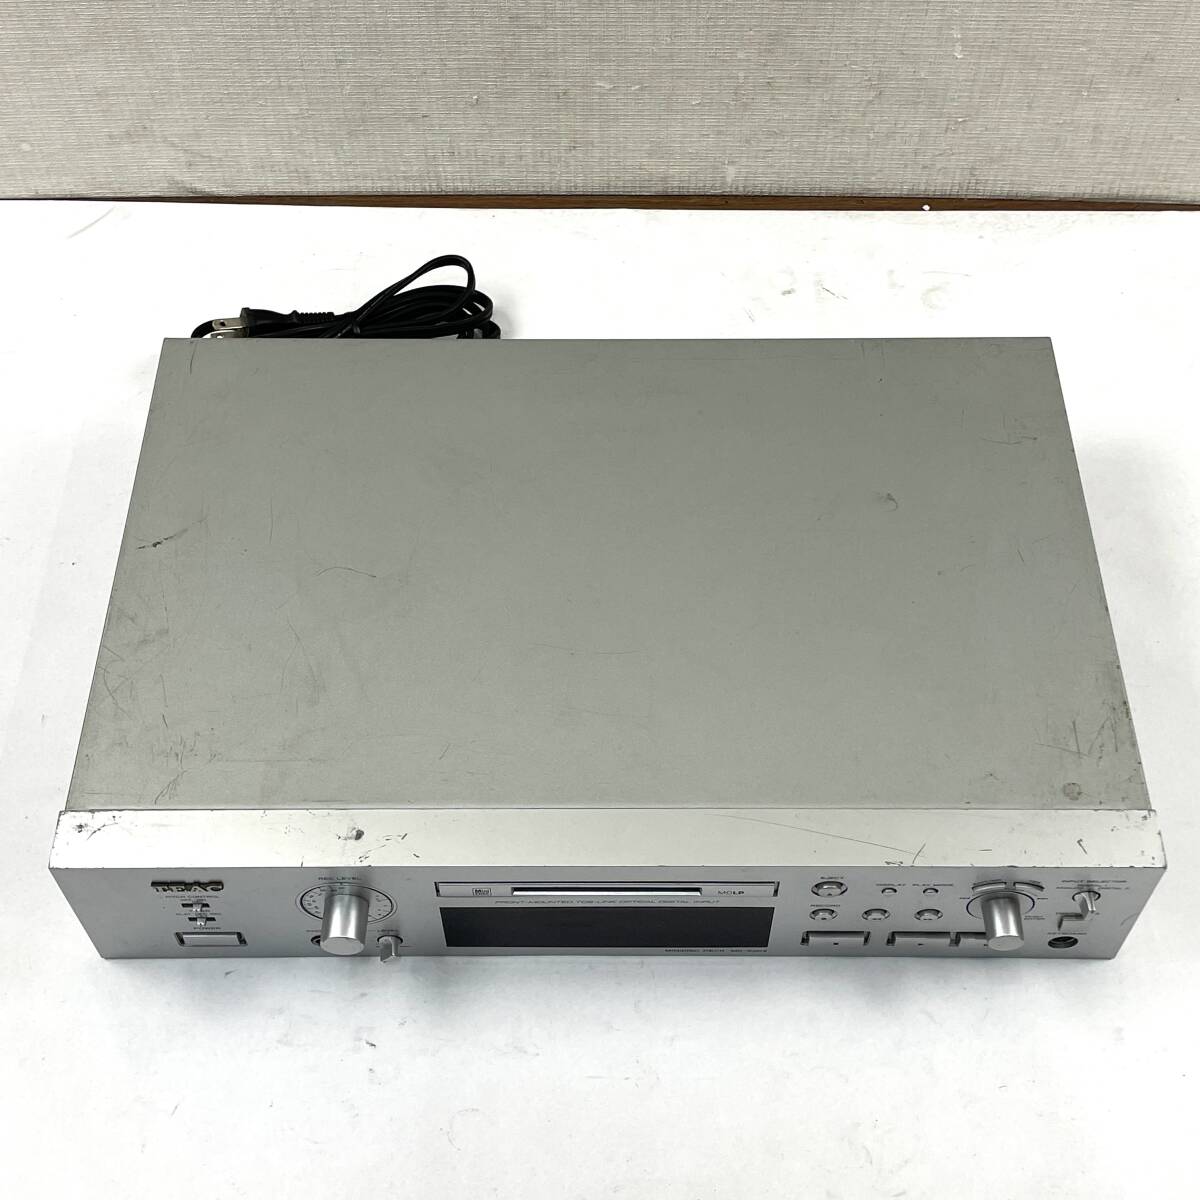 TEAC MDレコーダー MD-5MKII ティアック 24E 北TO2の画像6